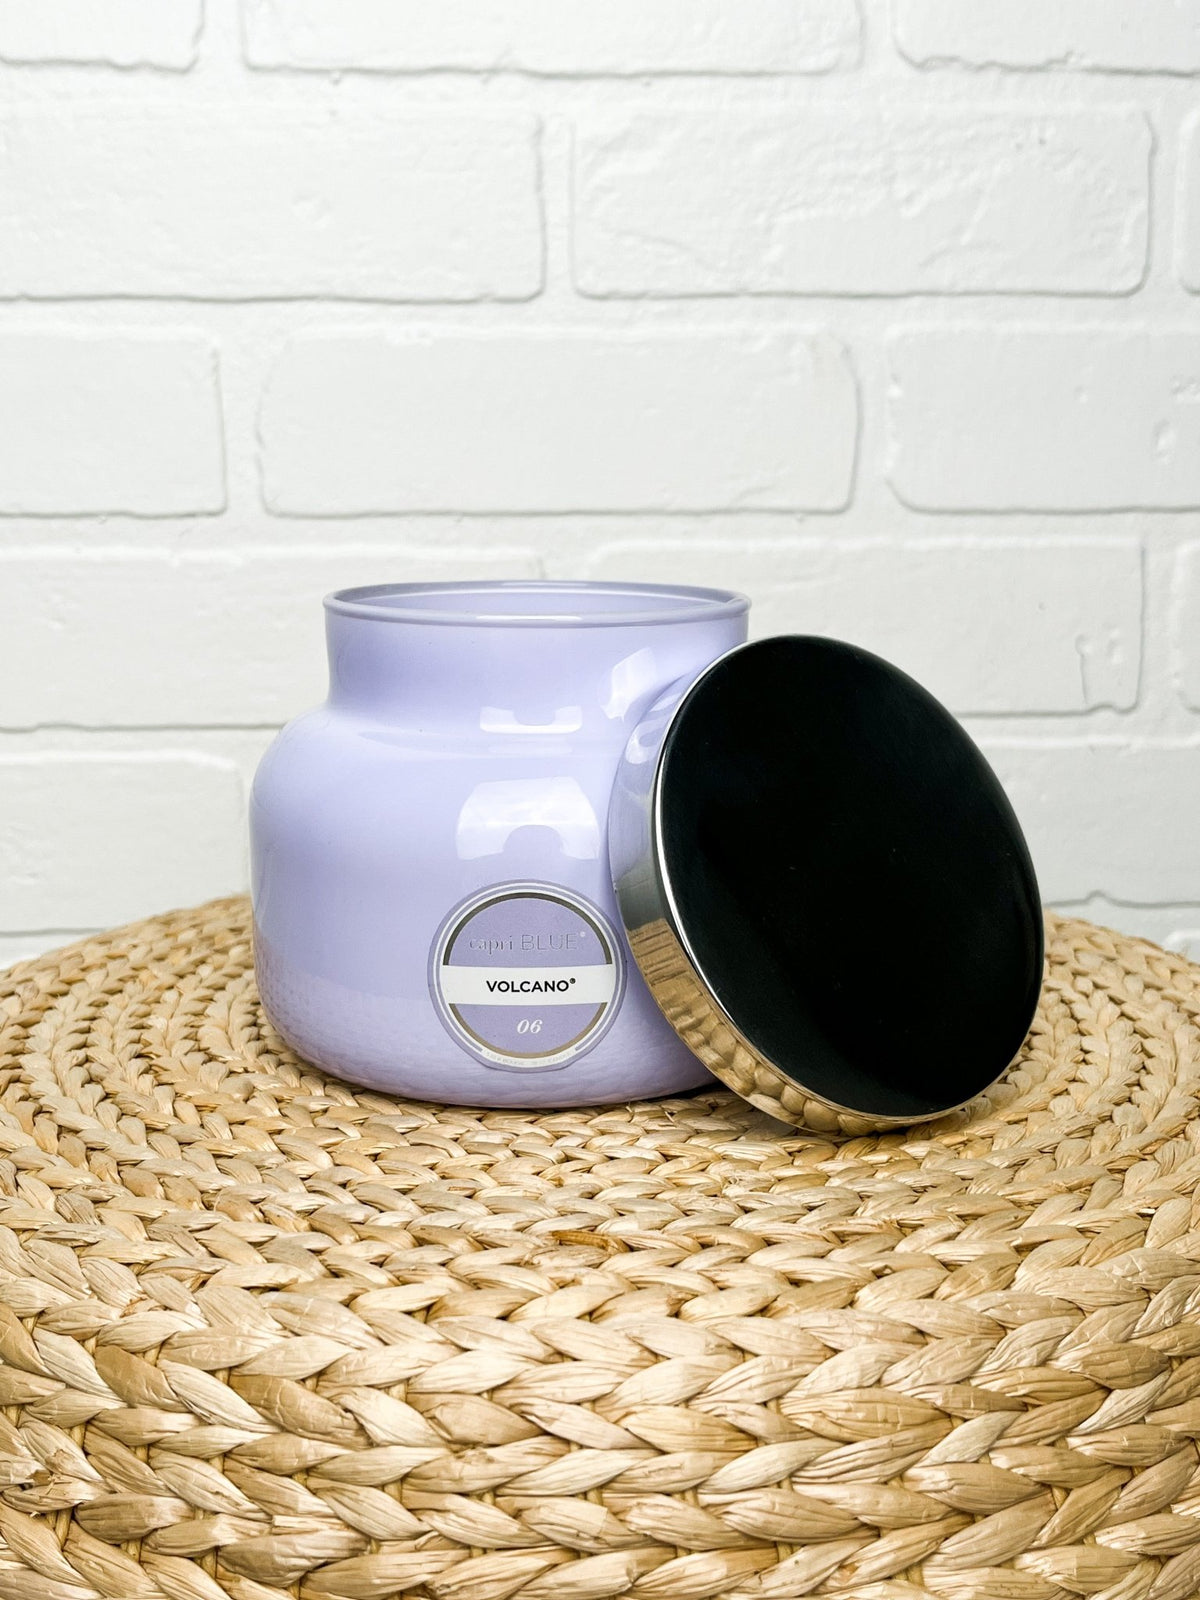 Capri Blue volcano scent 19oz candle digital lavender - Trendy Candles and Scents at Lush Fashion Lounge Boutique in Oklahoma City